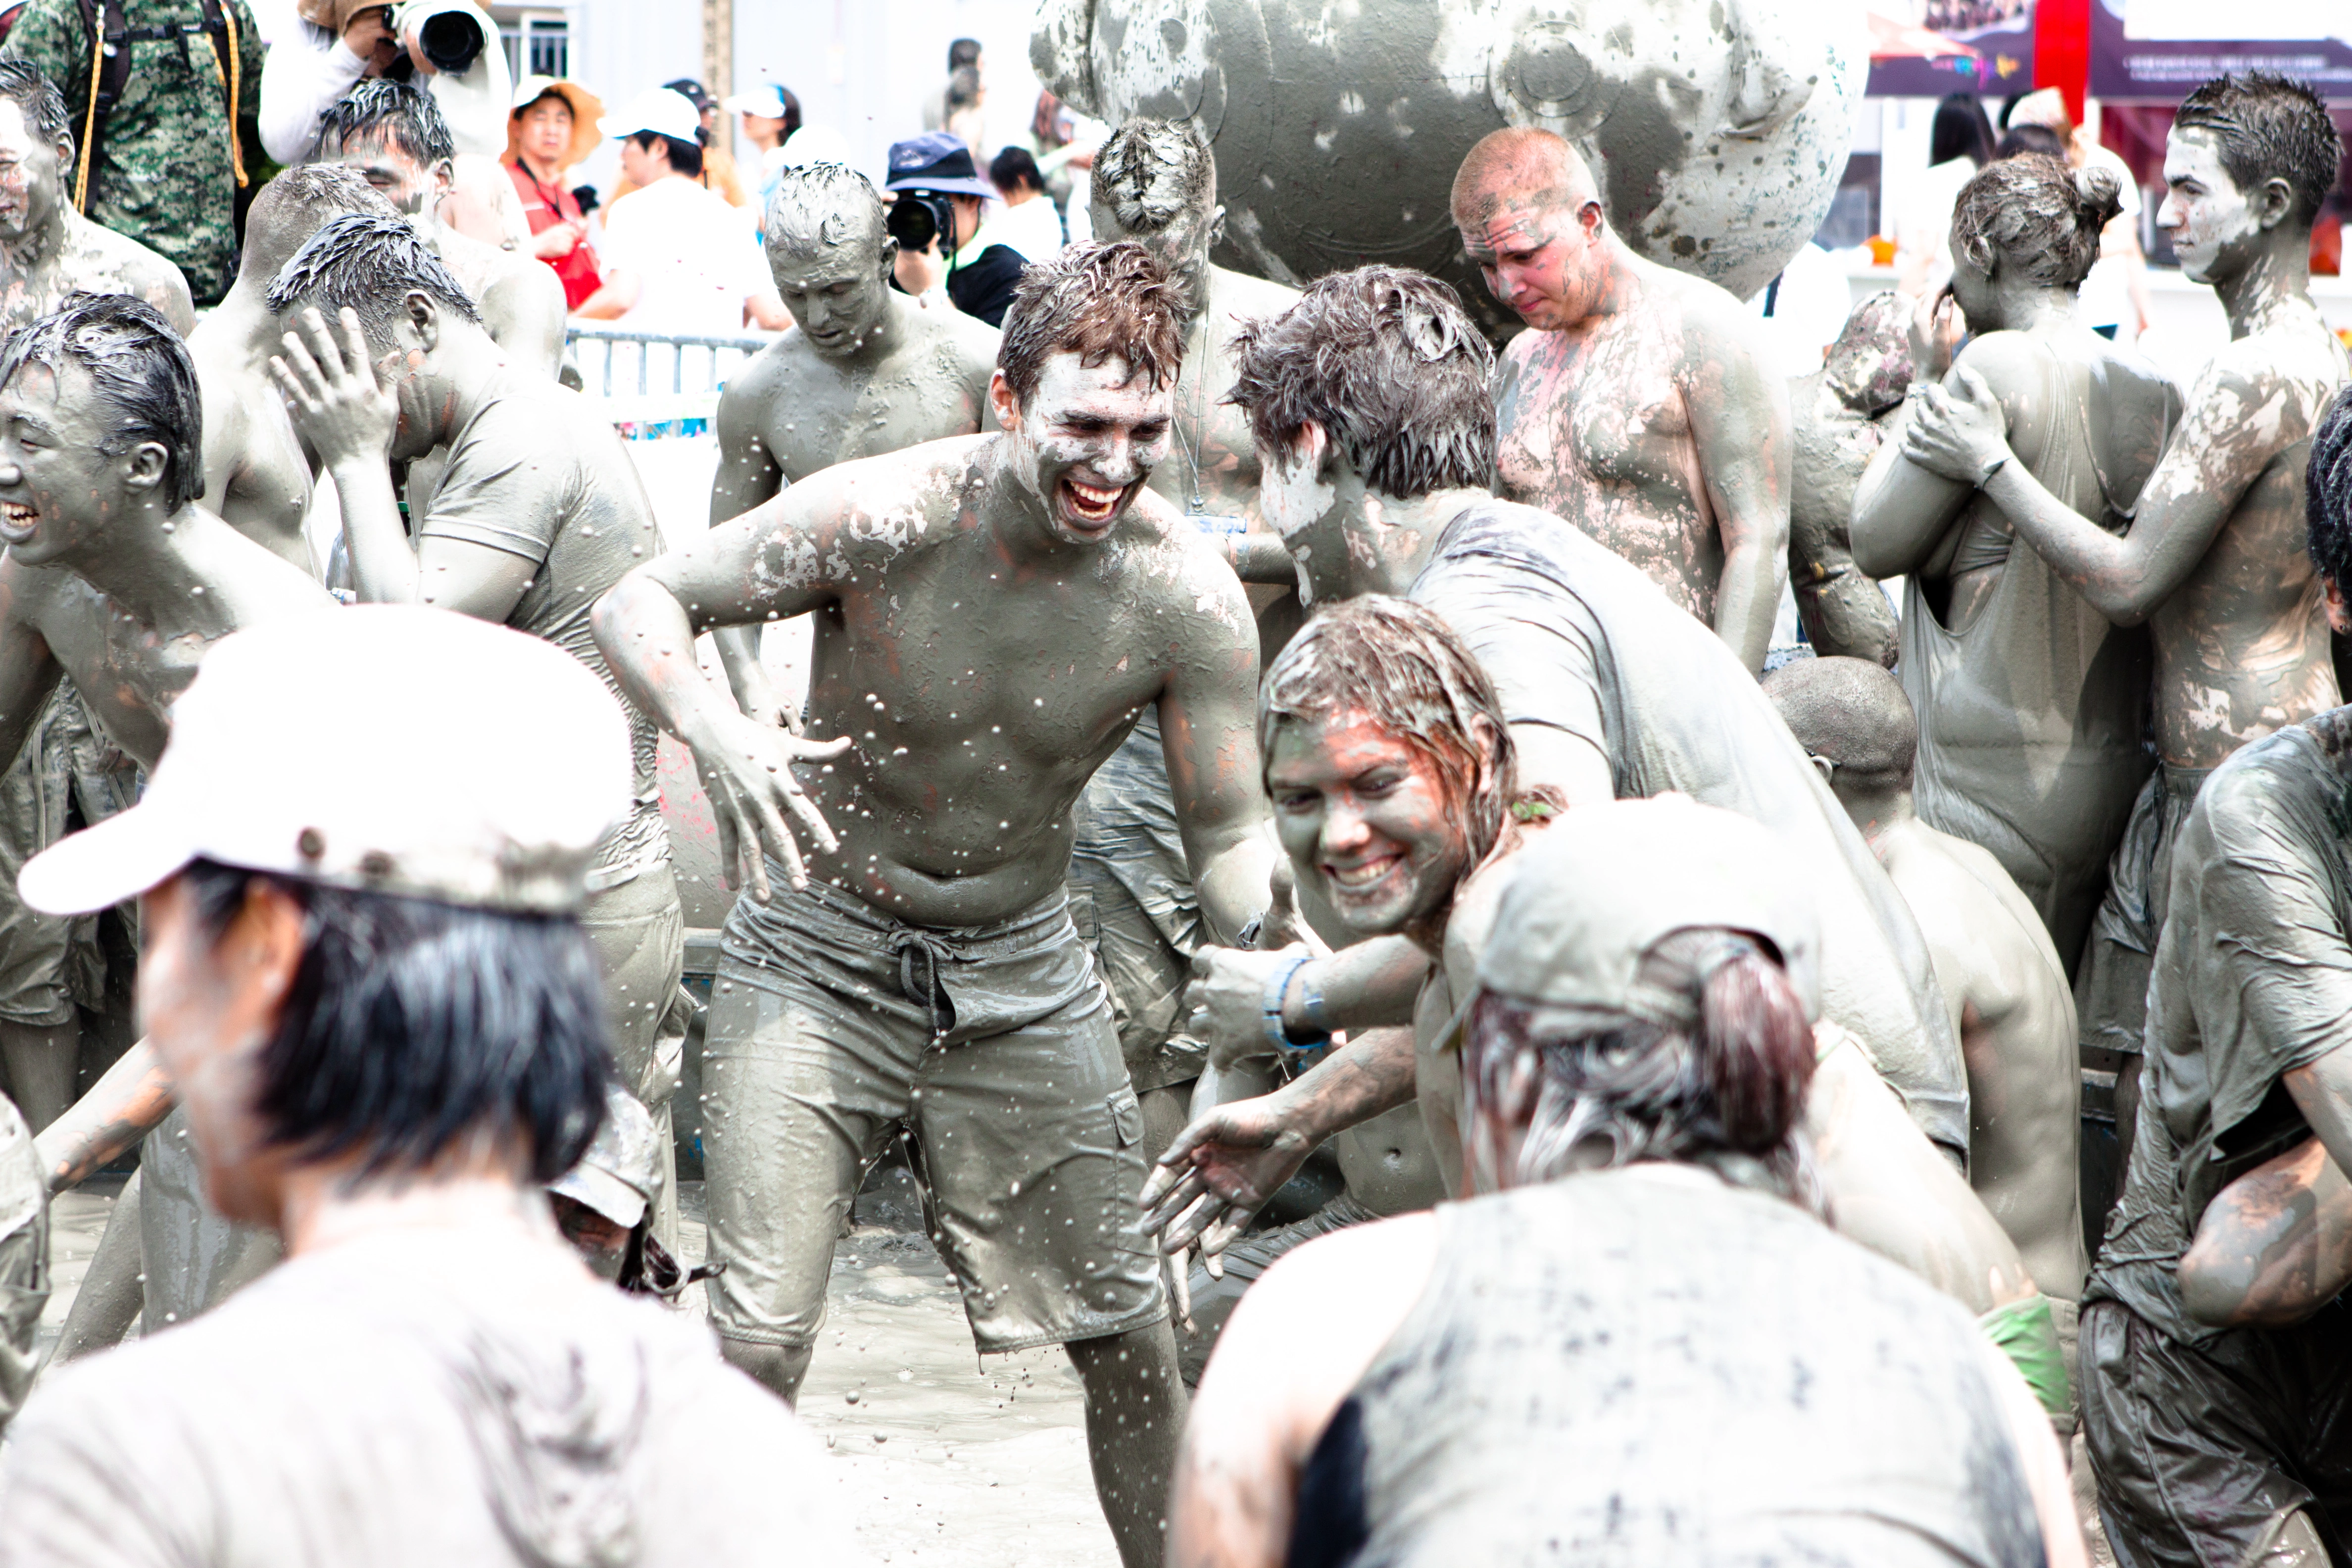 Participants covered in mud during Boryeong Mud Festival in South Korea